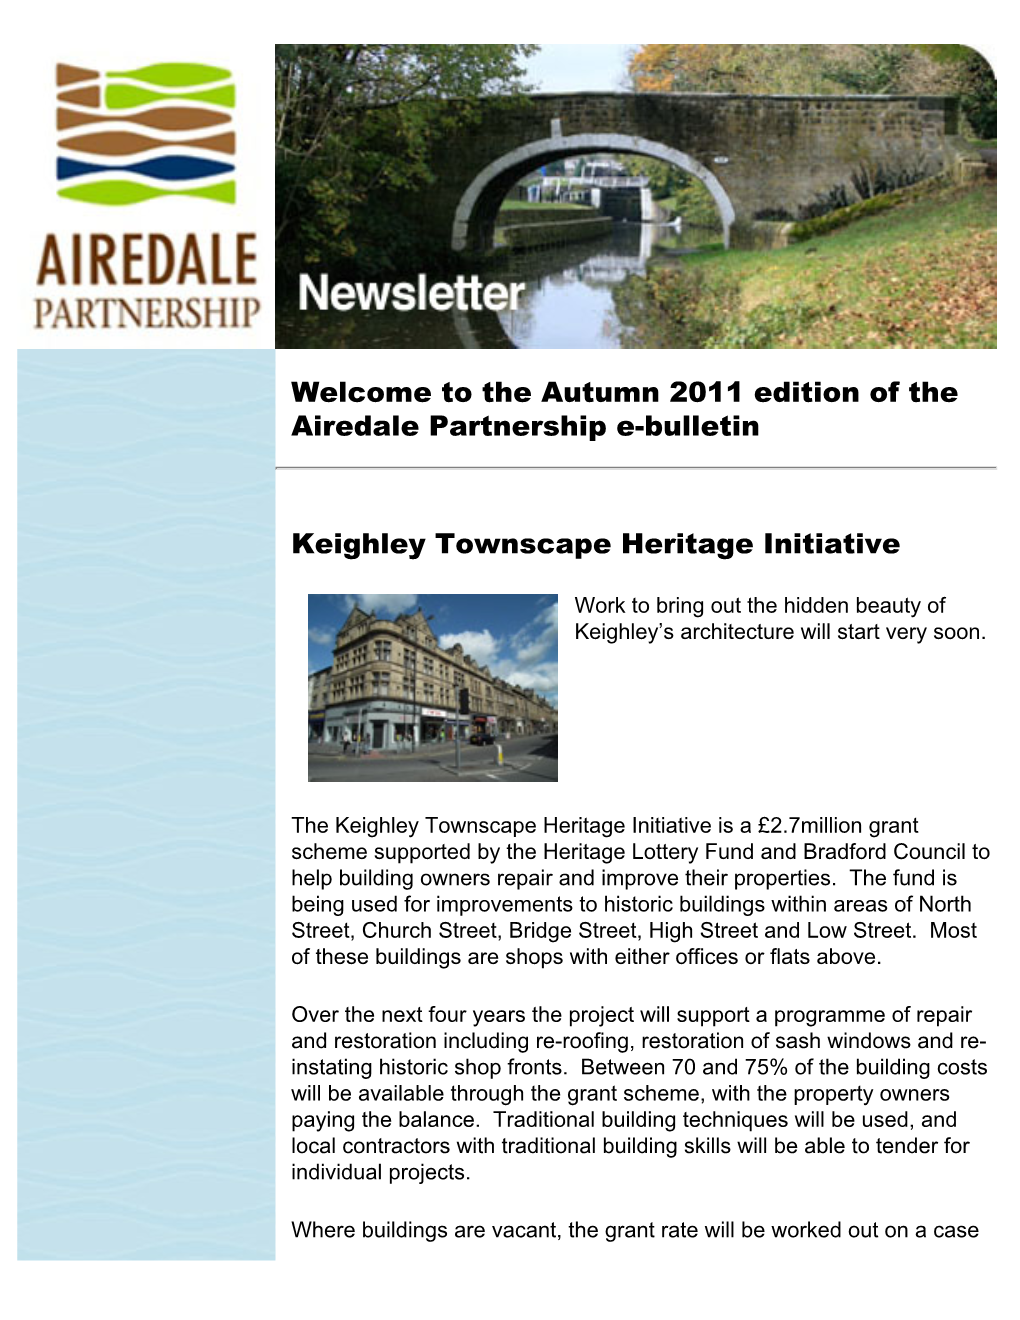 Welcome to the Autumn 2011 Edition of the Airedale Partnership E-Bulletin Keighley Townscape Heritage Initiative